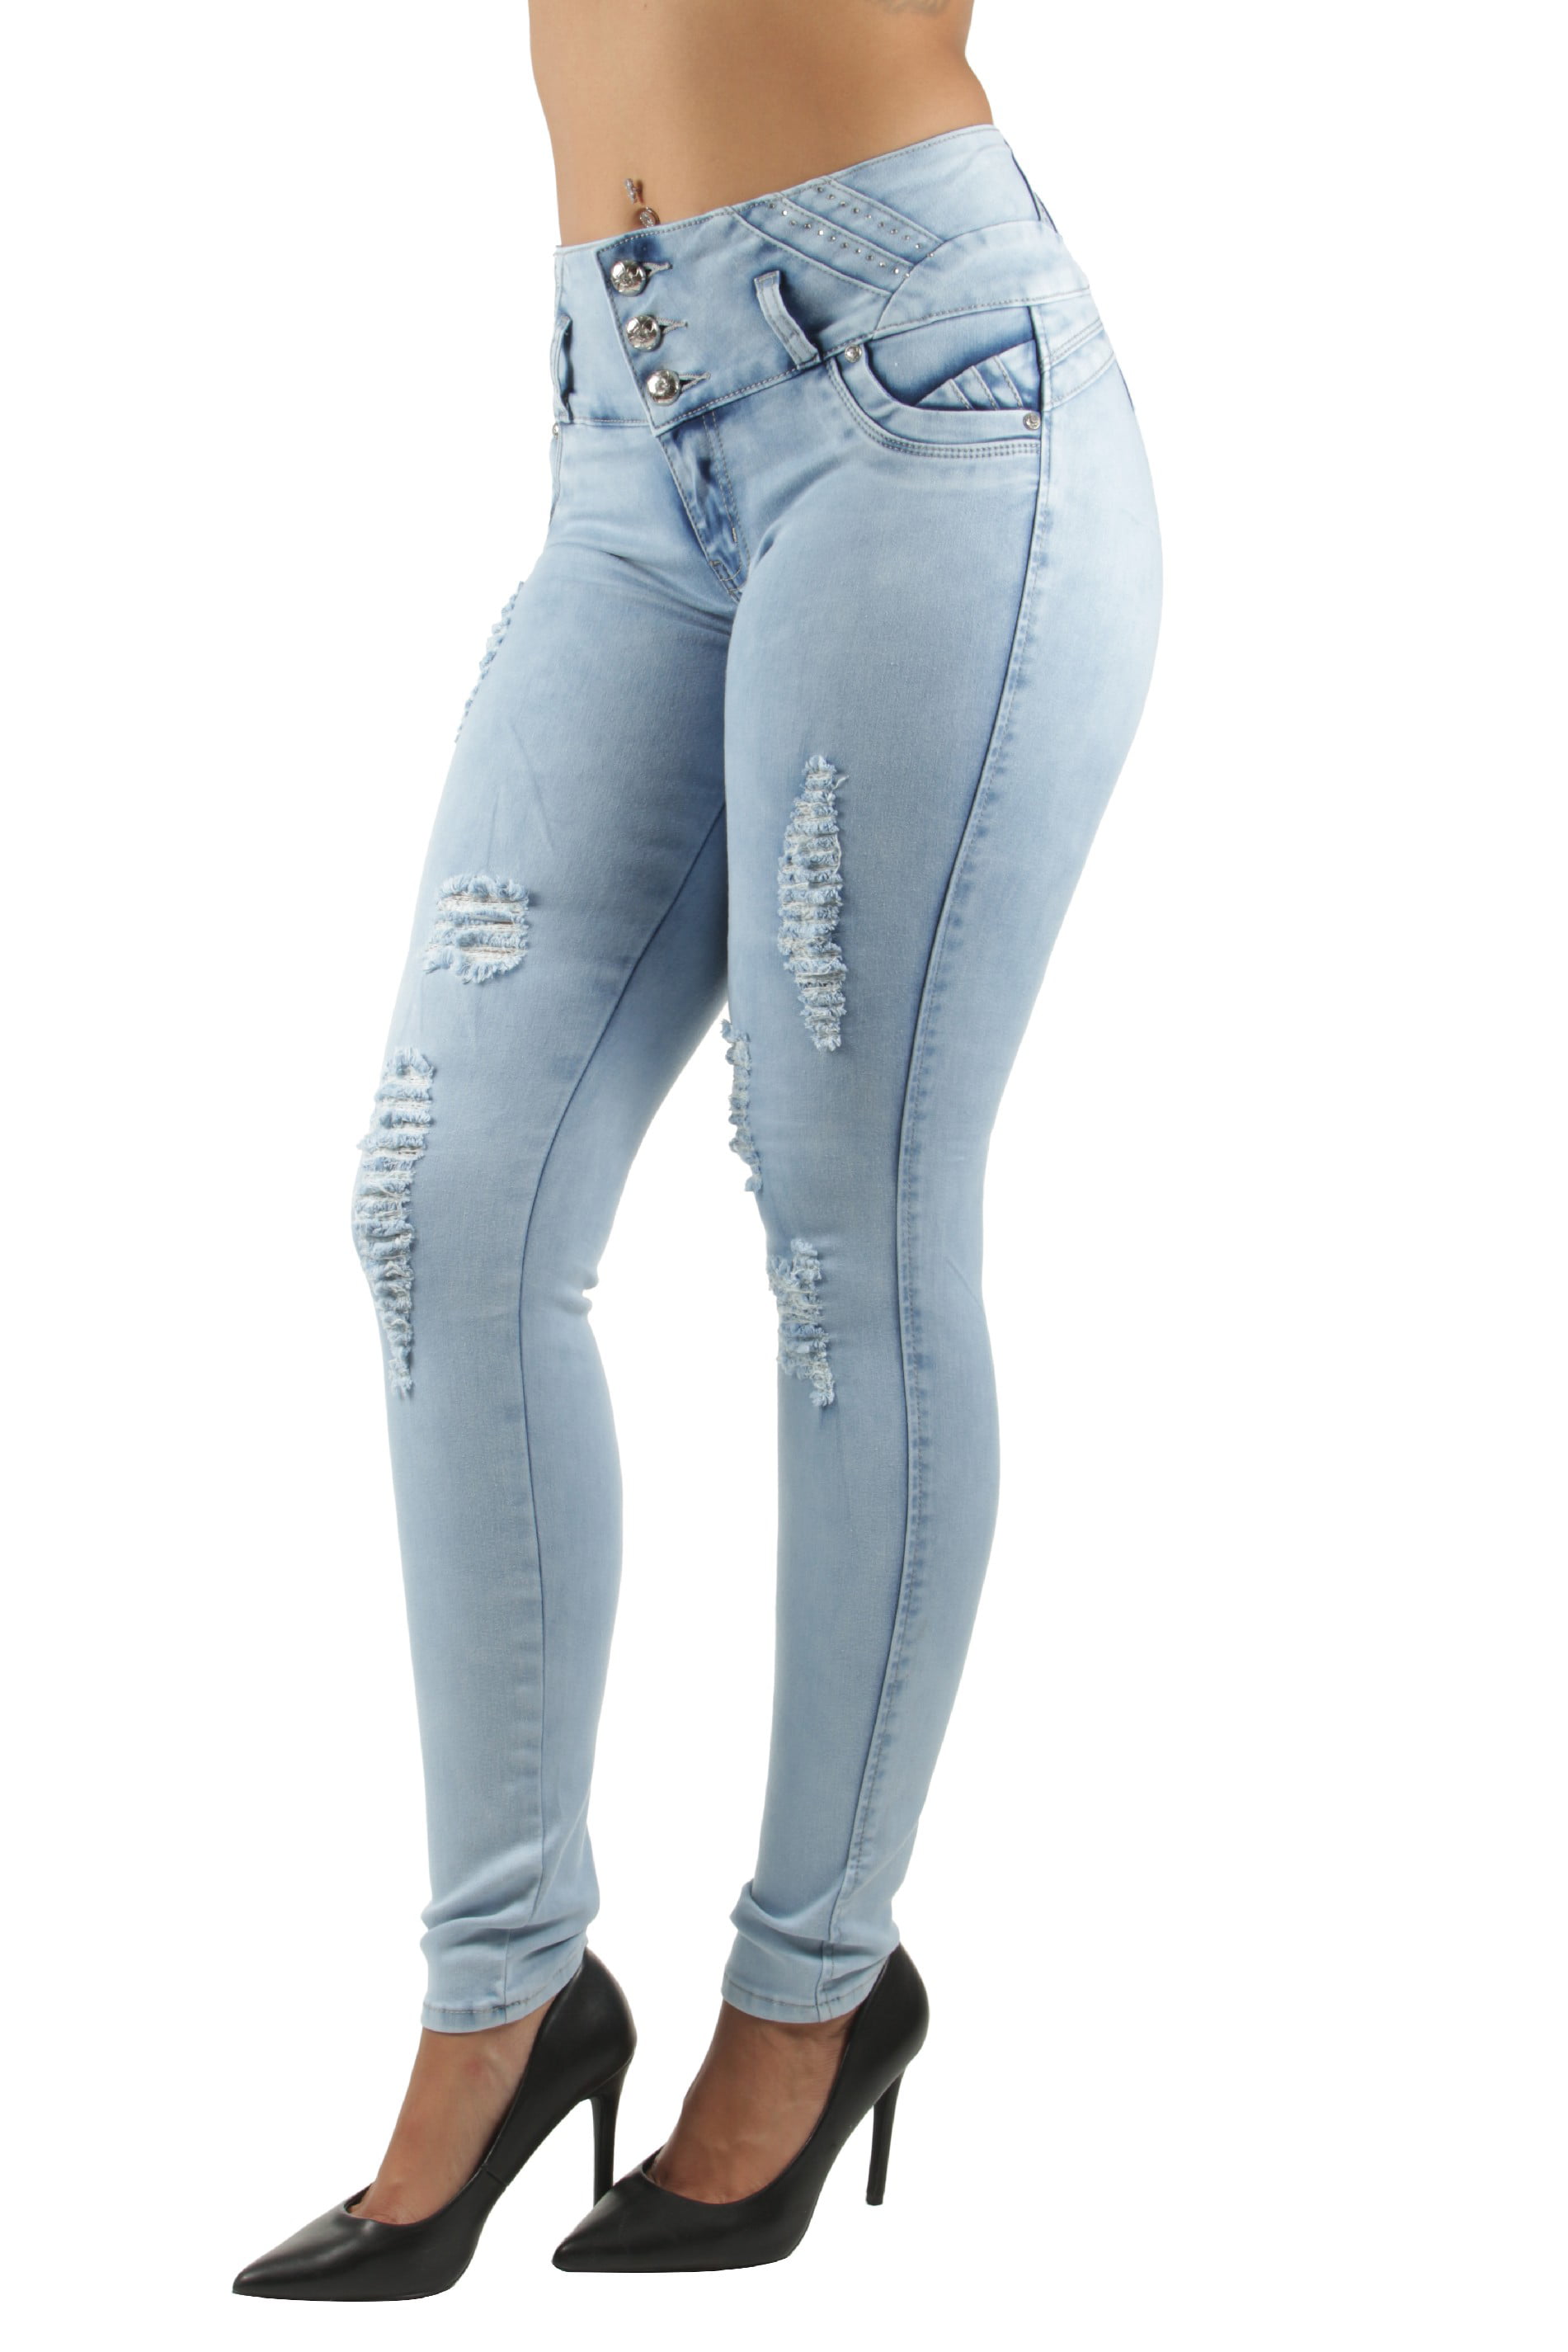 Destroyed Ripped Butt Lift Women's Juniors Push Up Skinny Jeans Mid Waist 